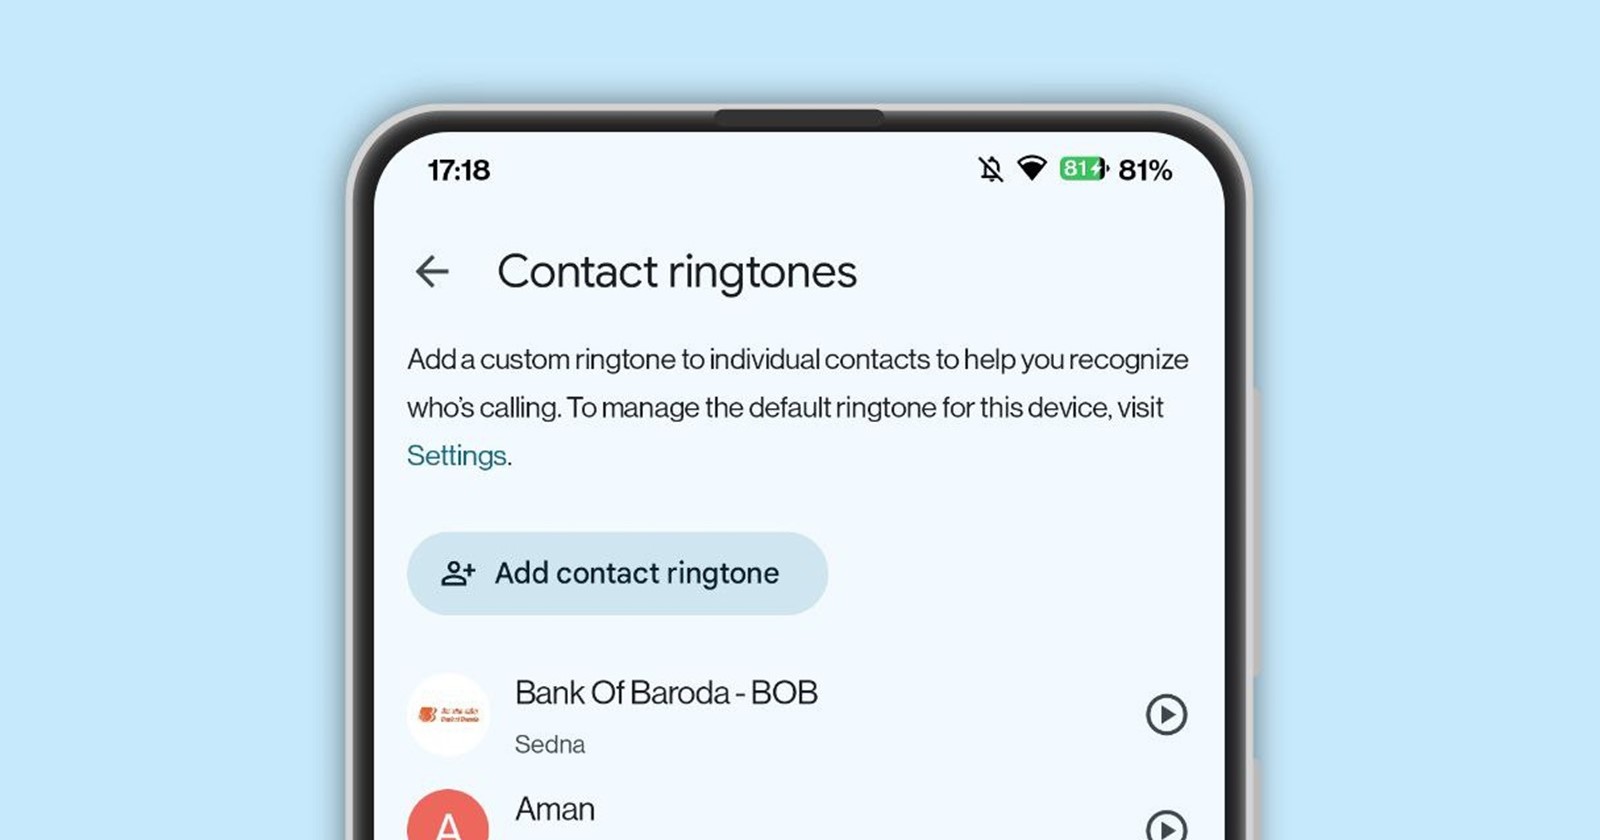 Google Contacts will make it easier to keep track of contacts you have assigned custom ringtones